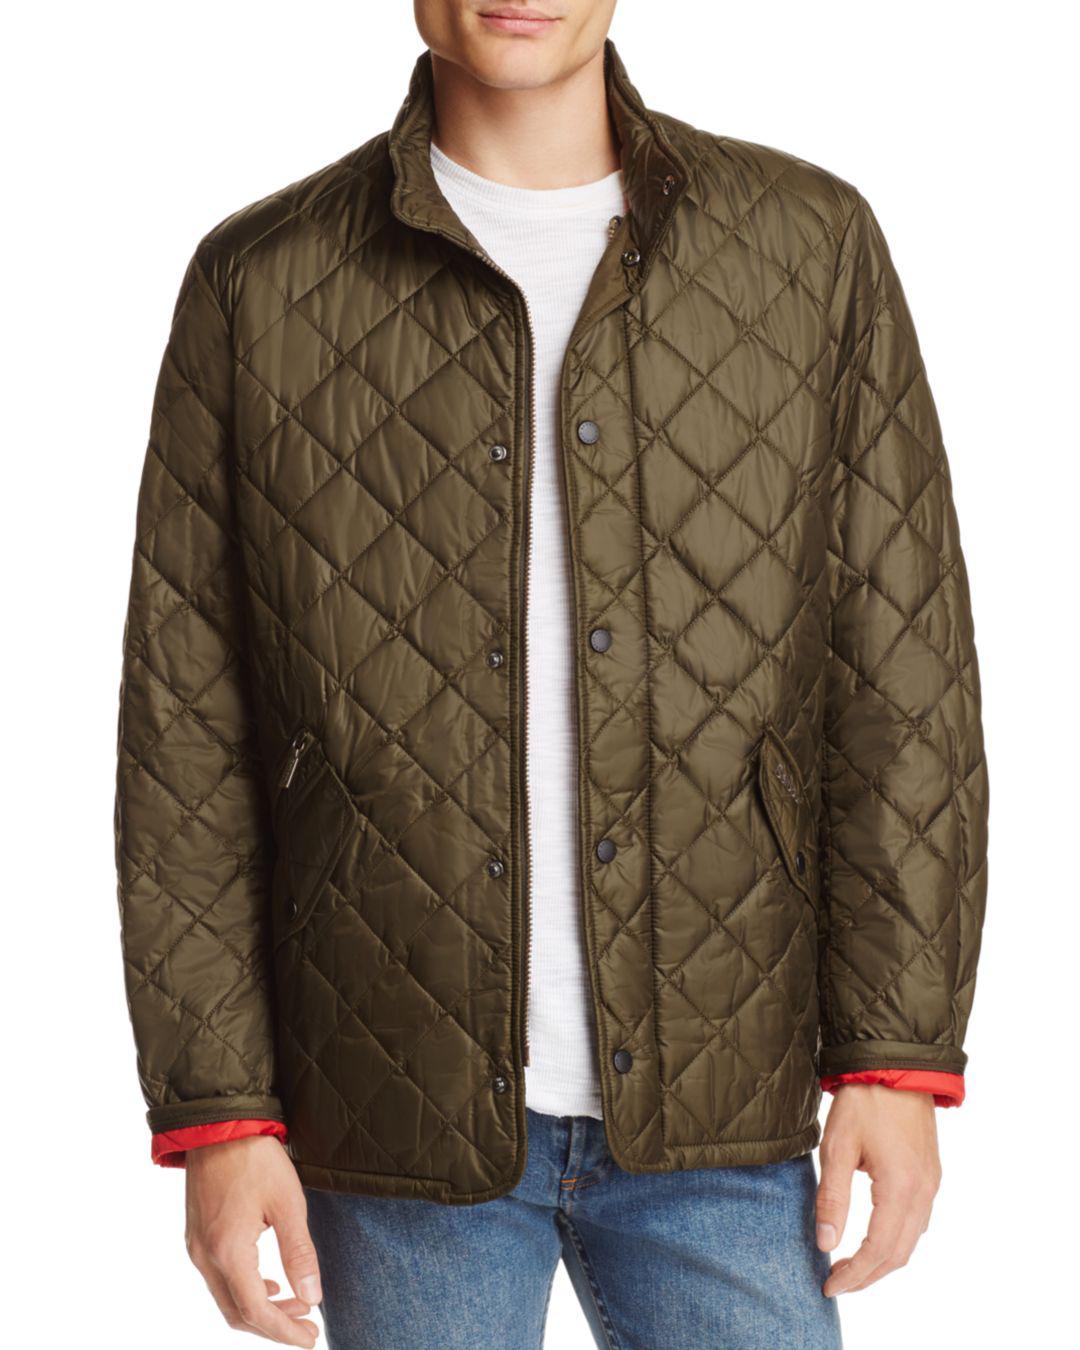 Barbour Flyweight Chelsea Quilted Jacket in Olive (Green) for Men - Lyst